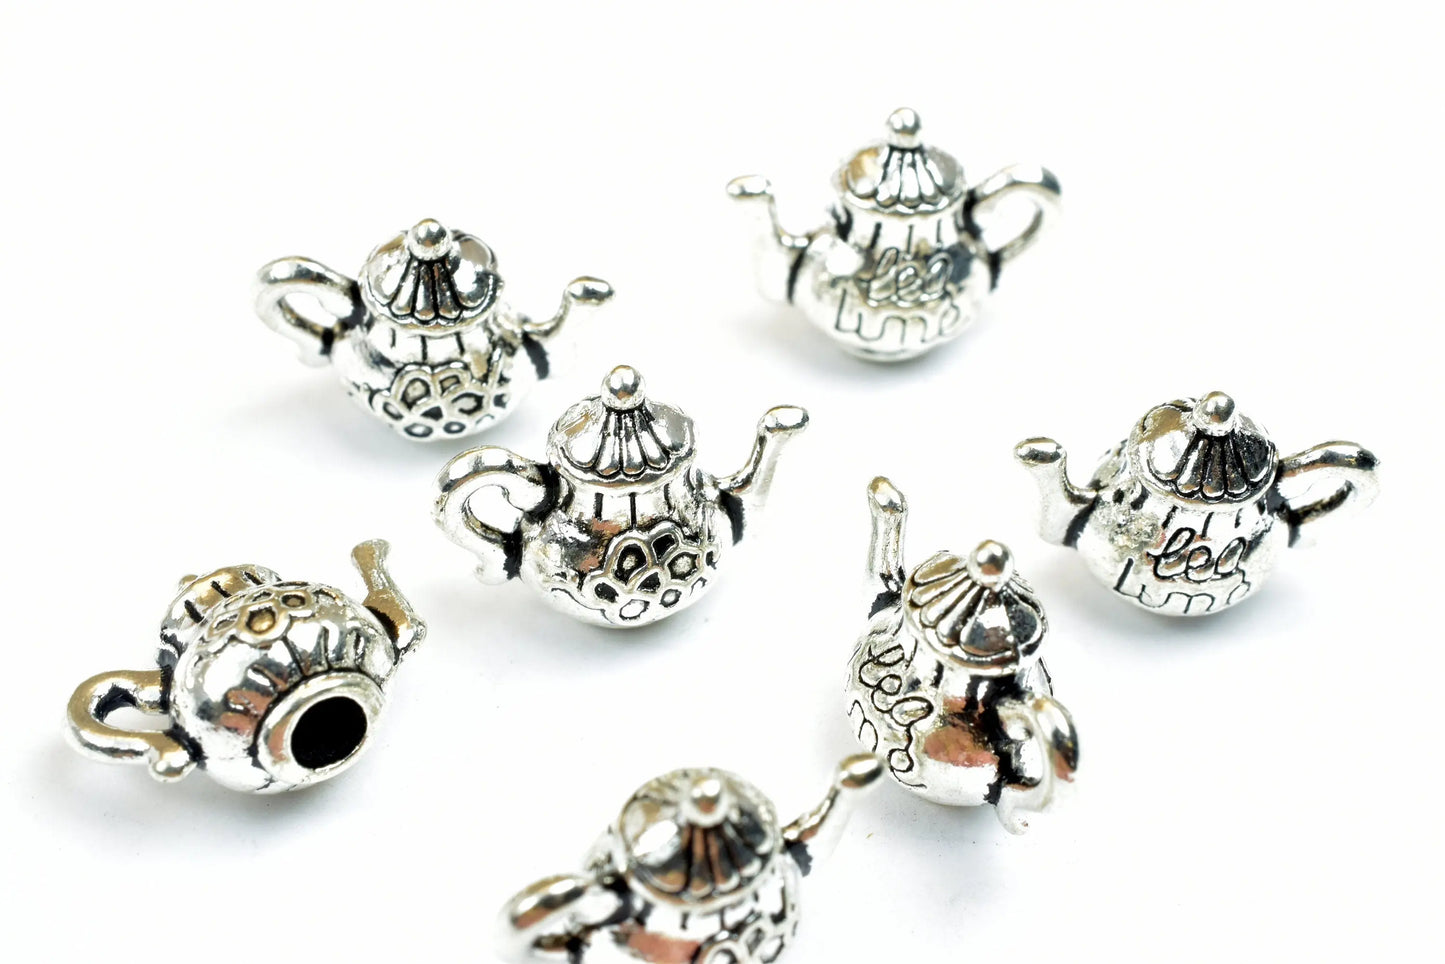 Kettle Charm Size 13x16mm Silver Color Kitchen 3D Charm Pendant Finding For Jewelry Making 7PCs/PK - BeadsFindingDepot